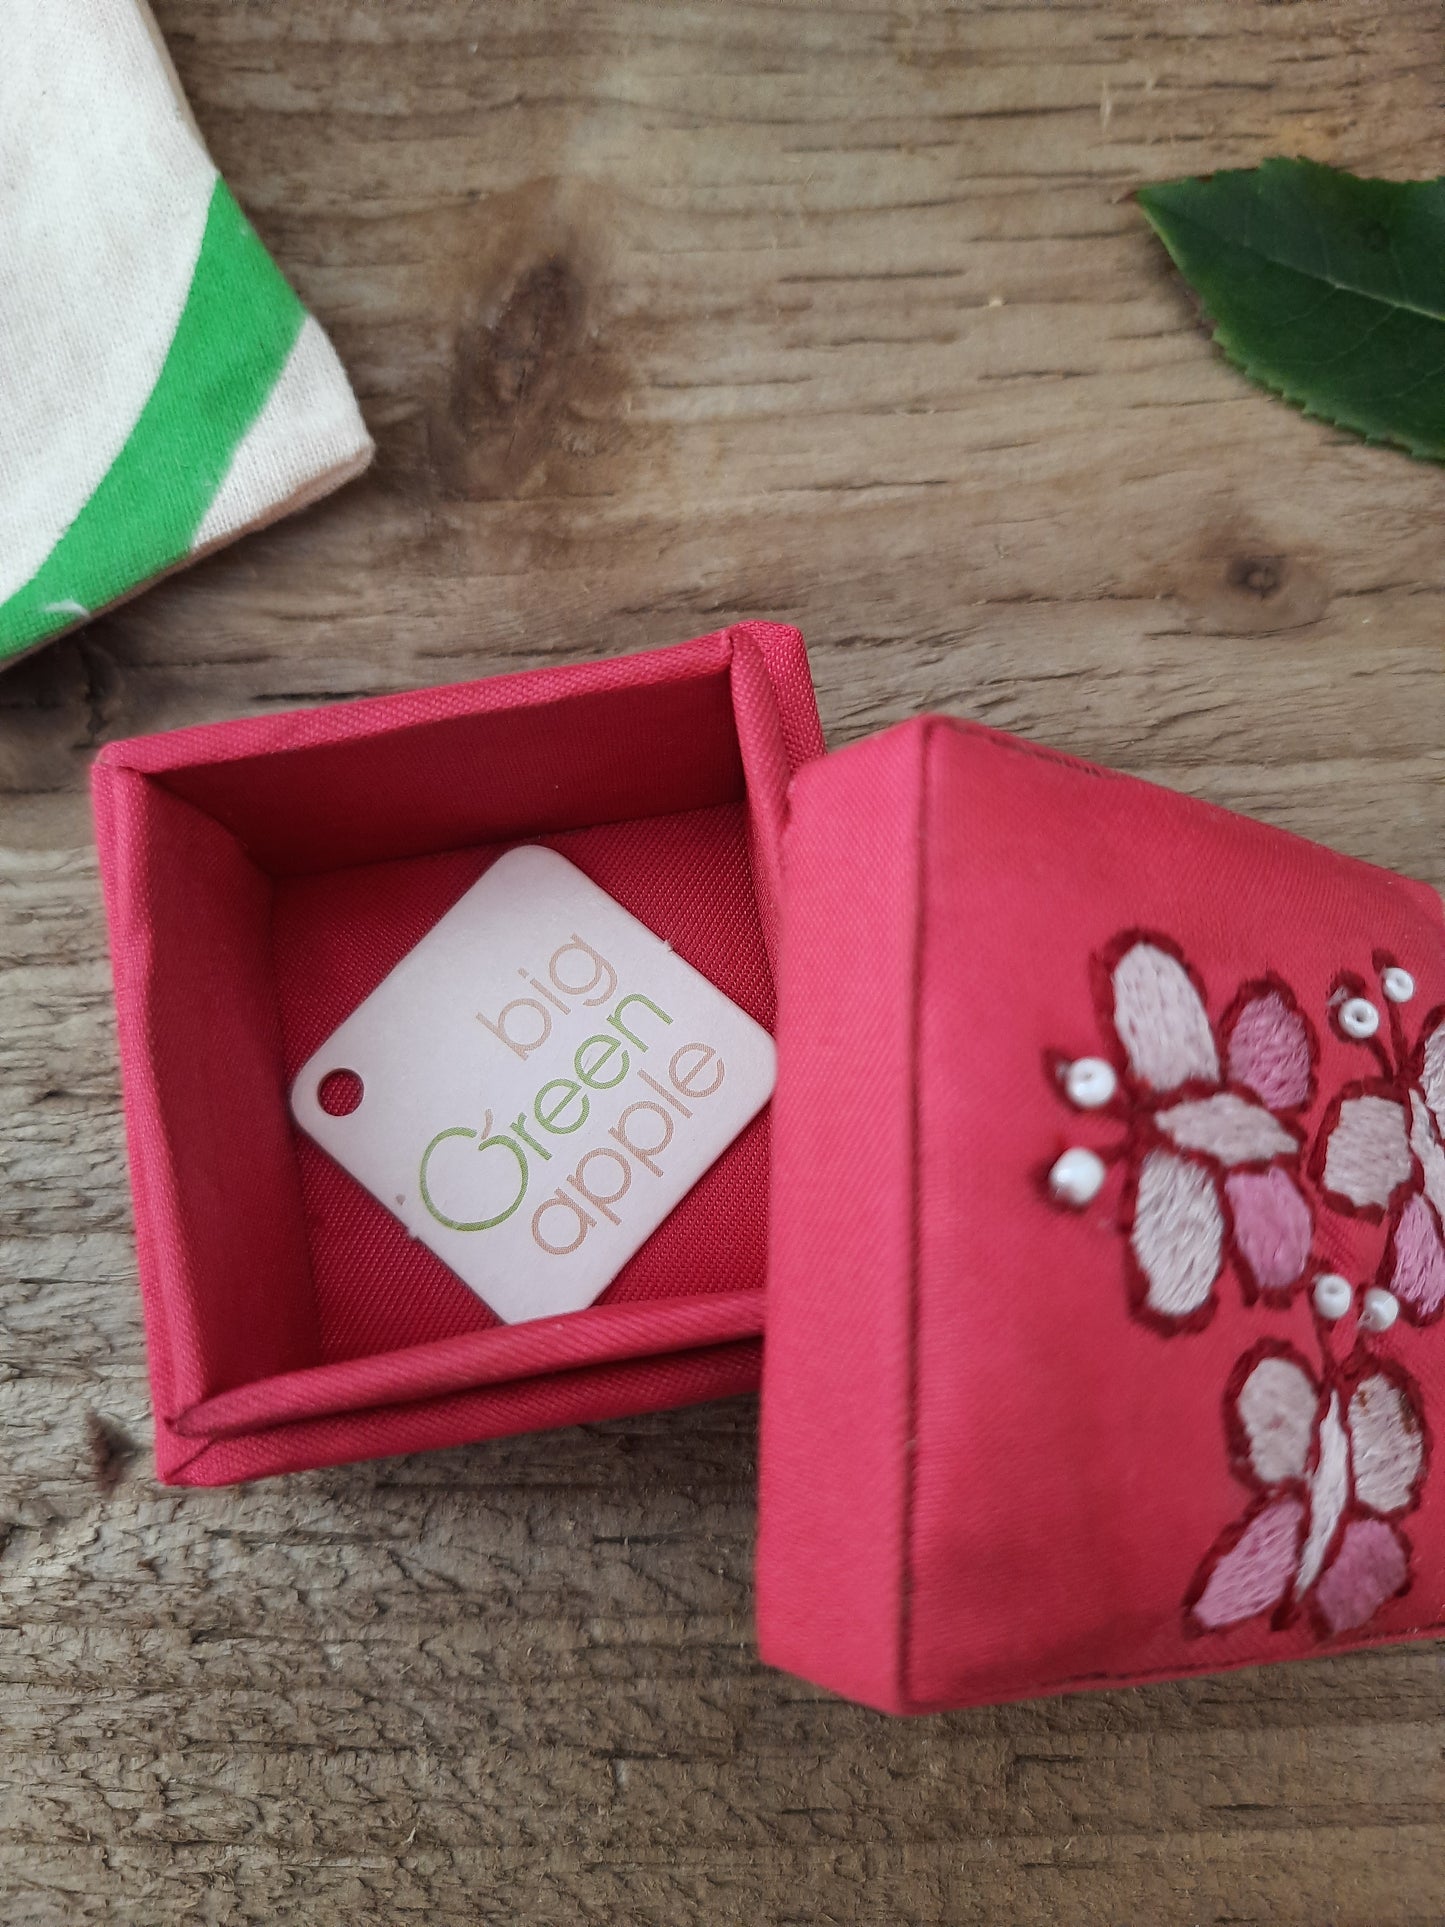 Fair Trade Items | Jewellery Box | Small | Ethical Jewellery | Eco Friendly Gifts